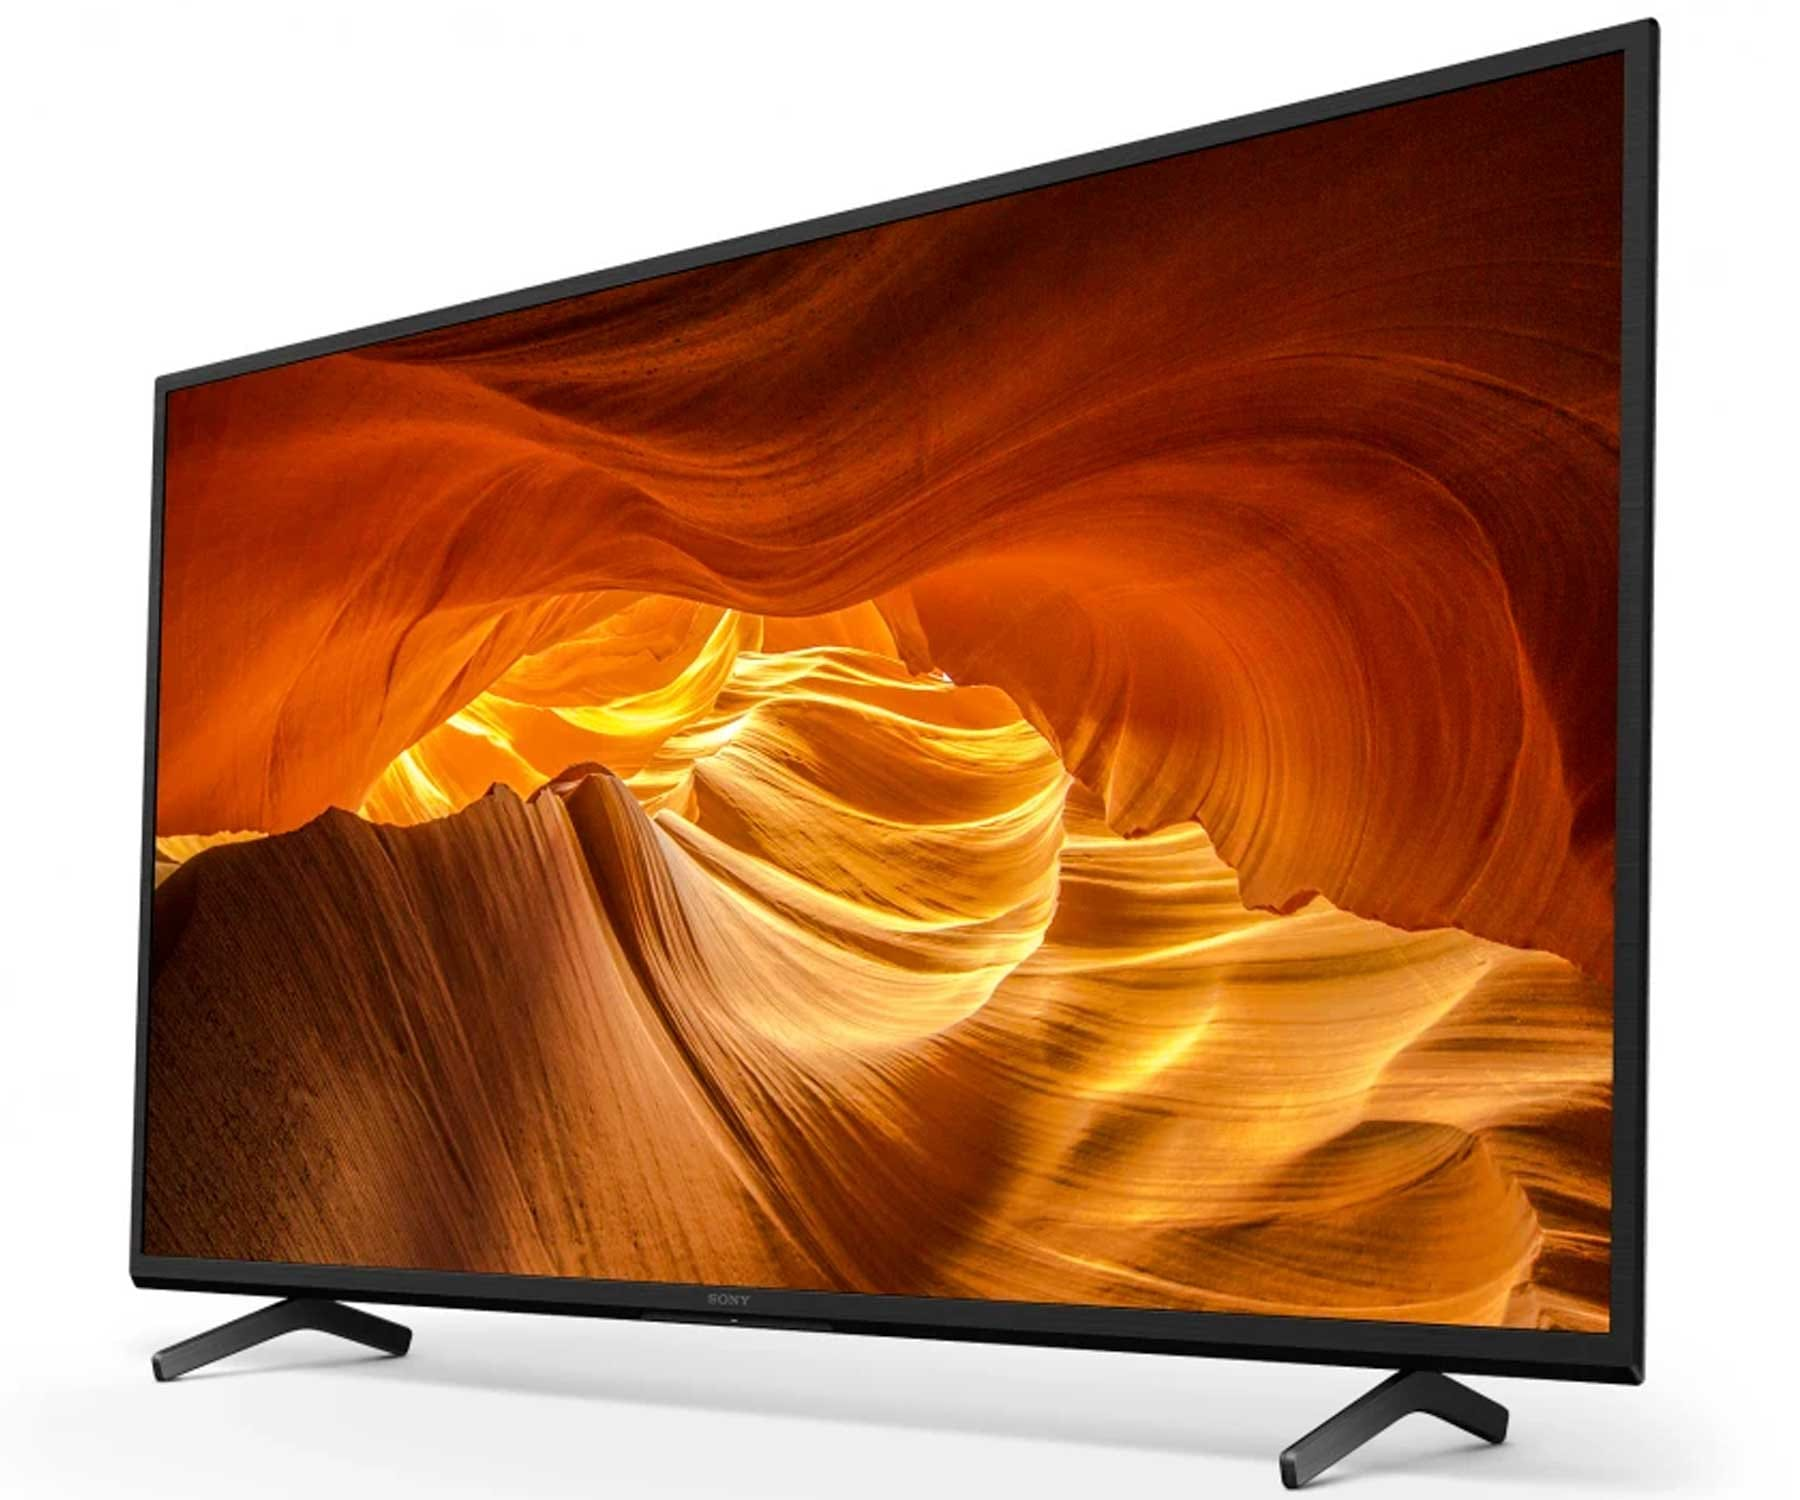 127,00 SONY 50,00 LED Android) / cm, Zoll (Flat, 4K, KD50X73K TV HDR